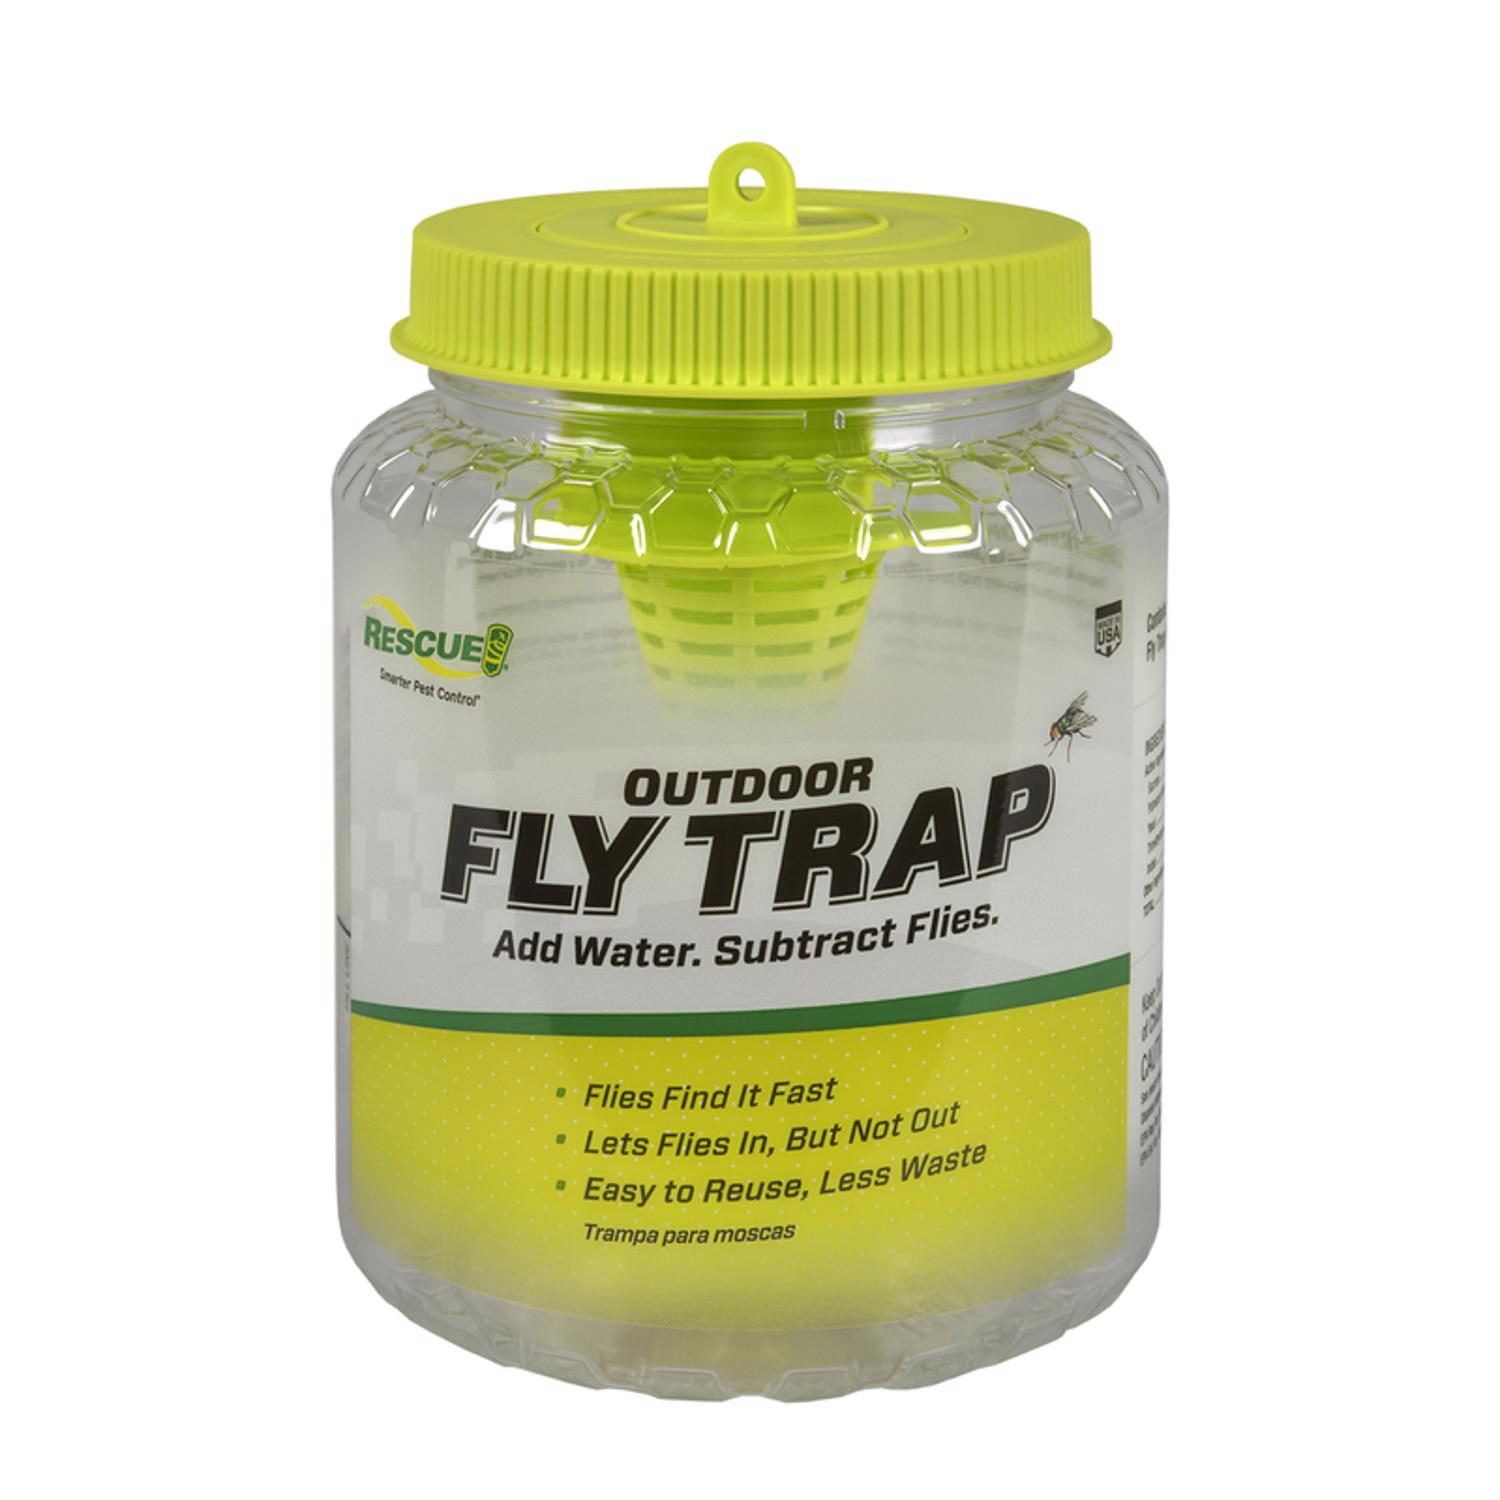 Zevo Max Flying Insect Trap, Fly Trap (1 Corded Plug-In Base + 2